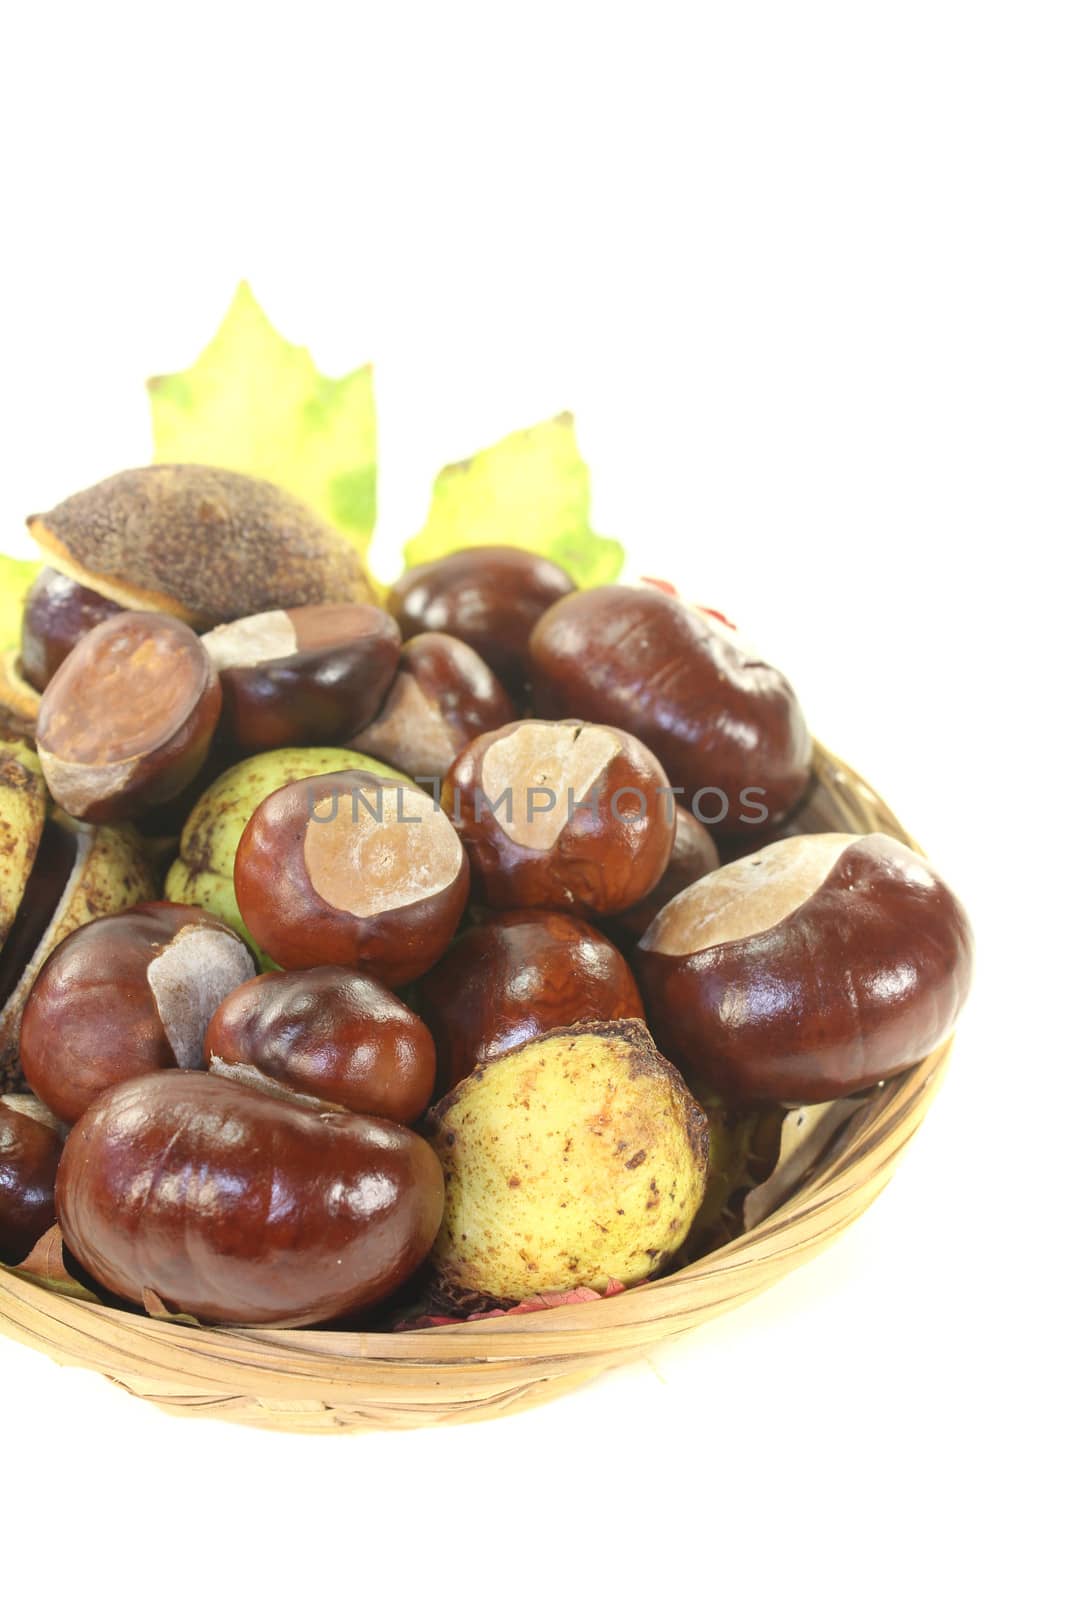 brown horse chestnuts in a basket on a bright background